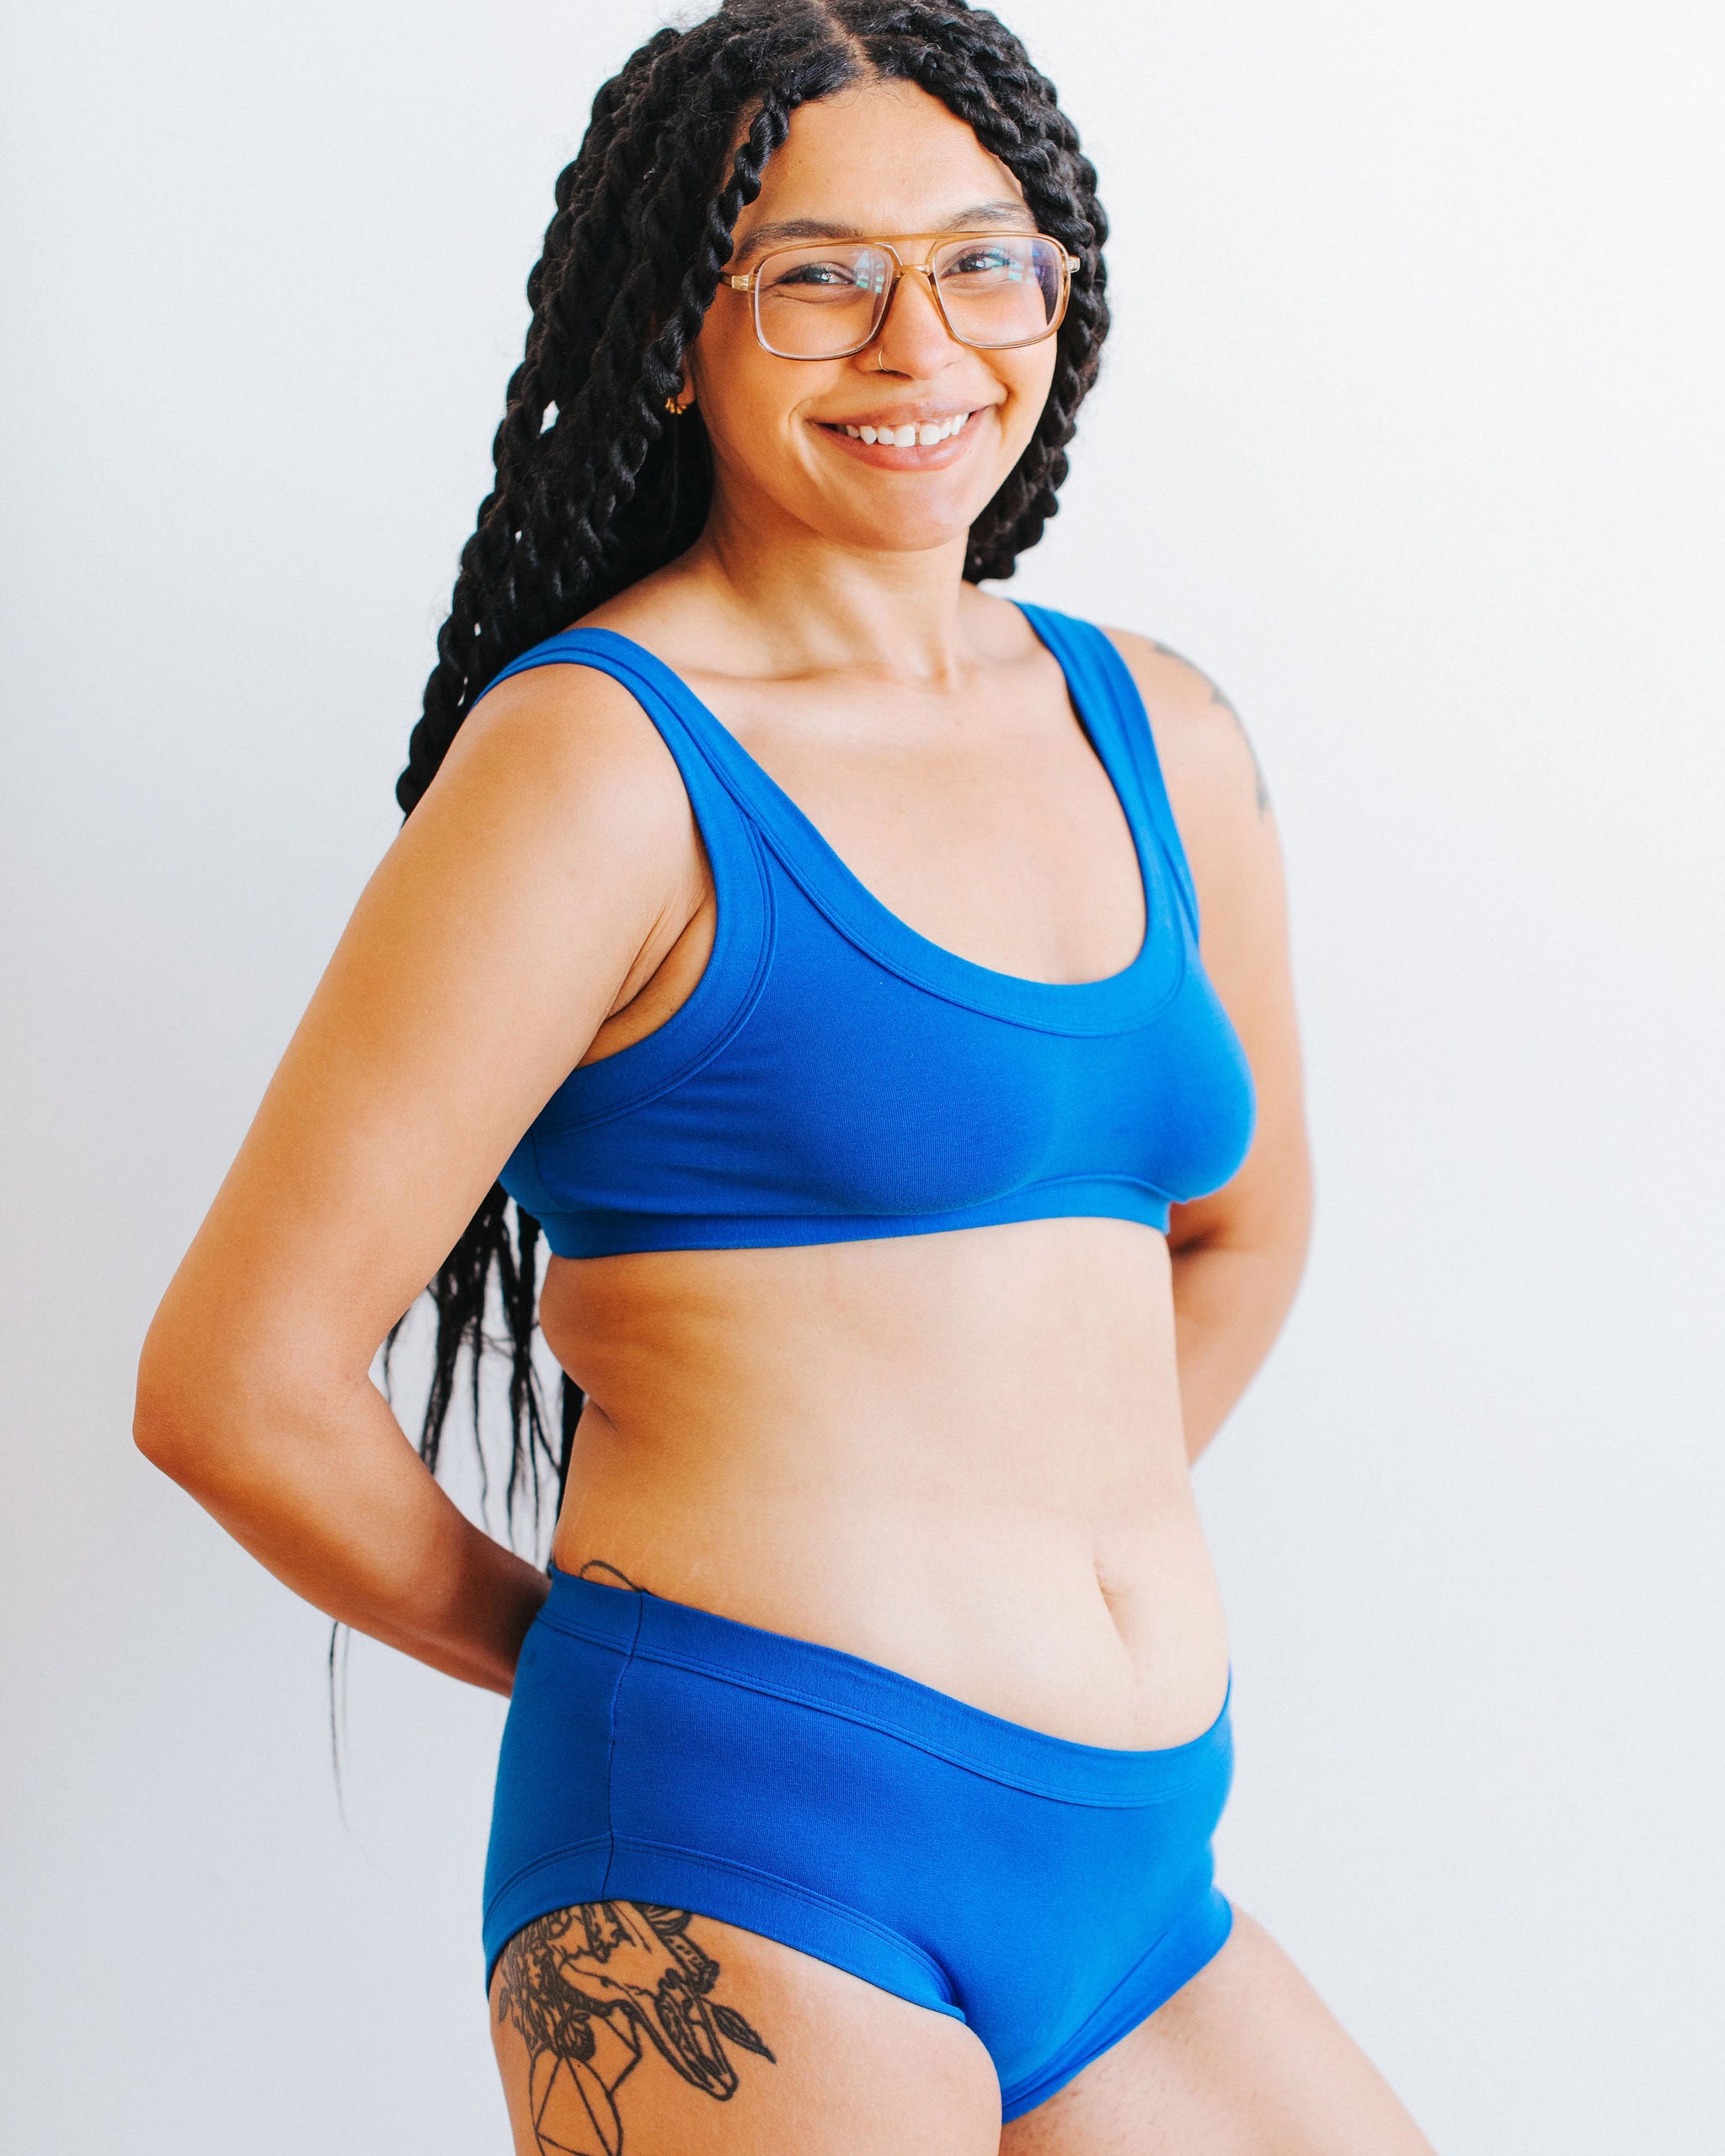 Model wearing Thunderpants Hipster style underwear and Bralette in Blueberry Blue.